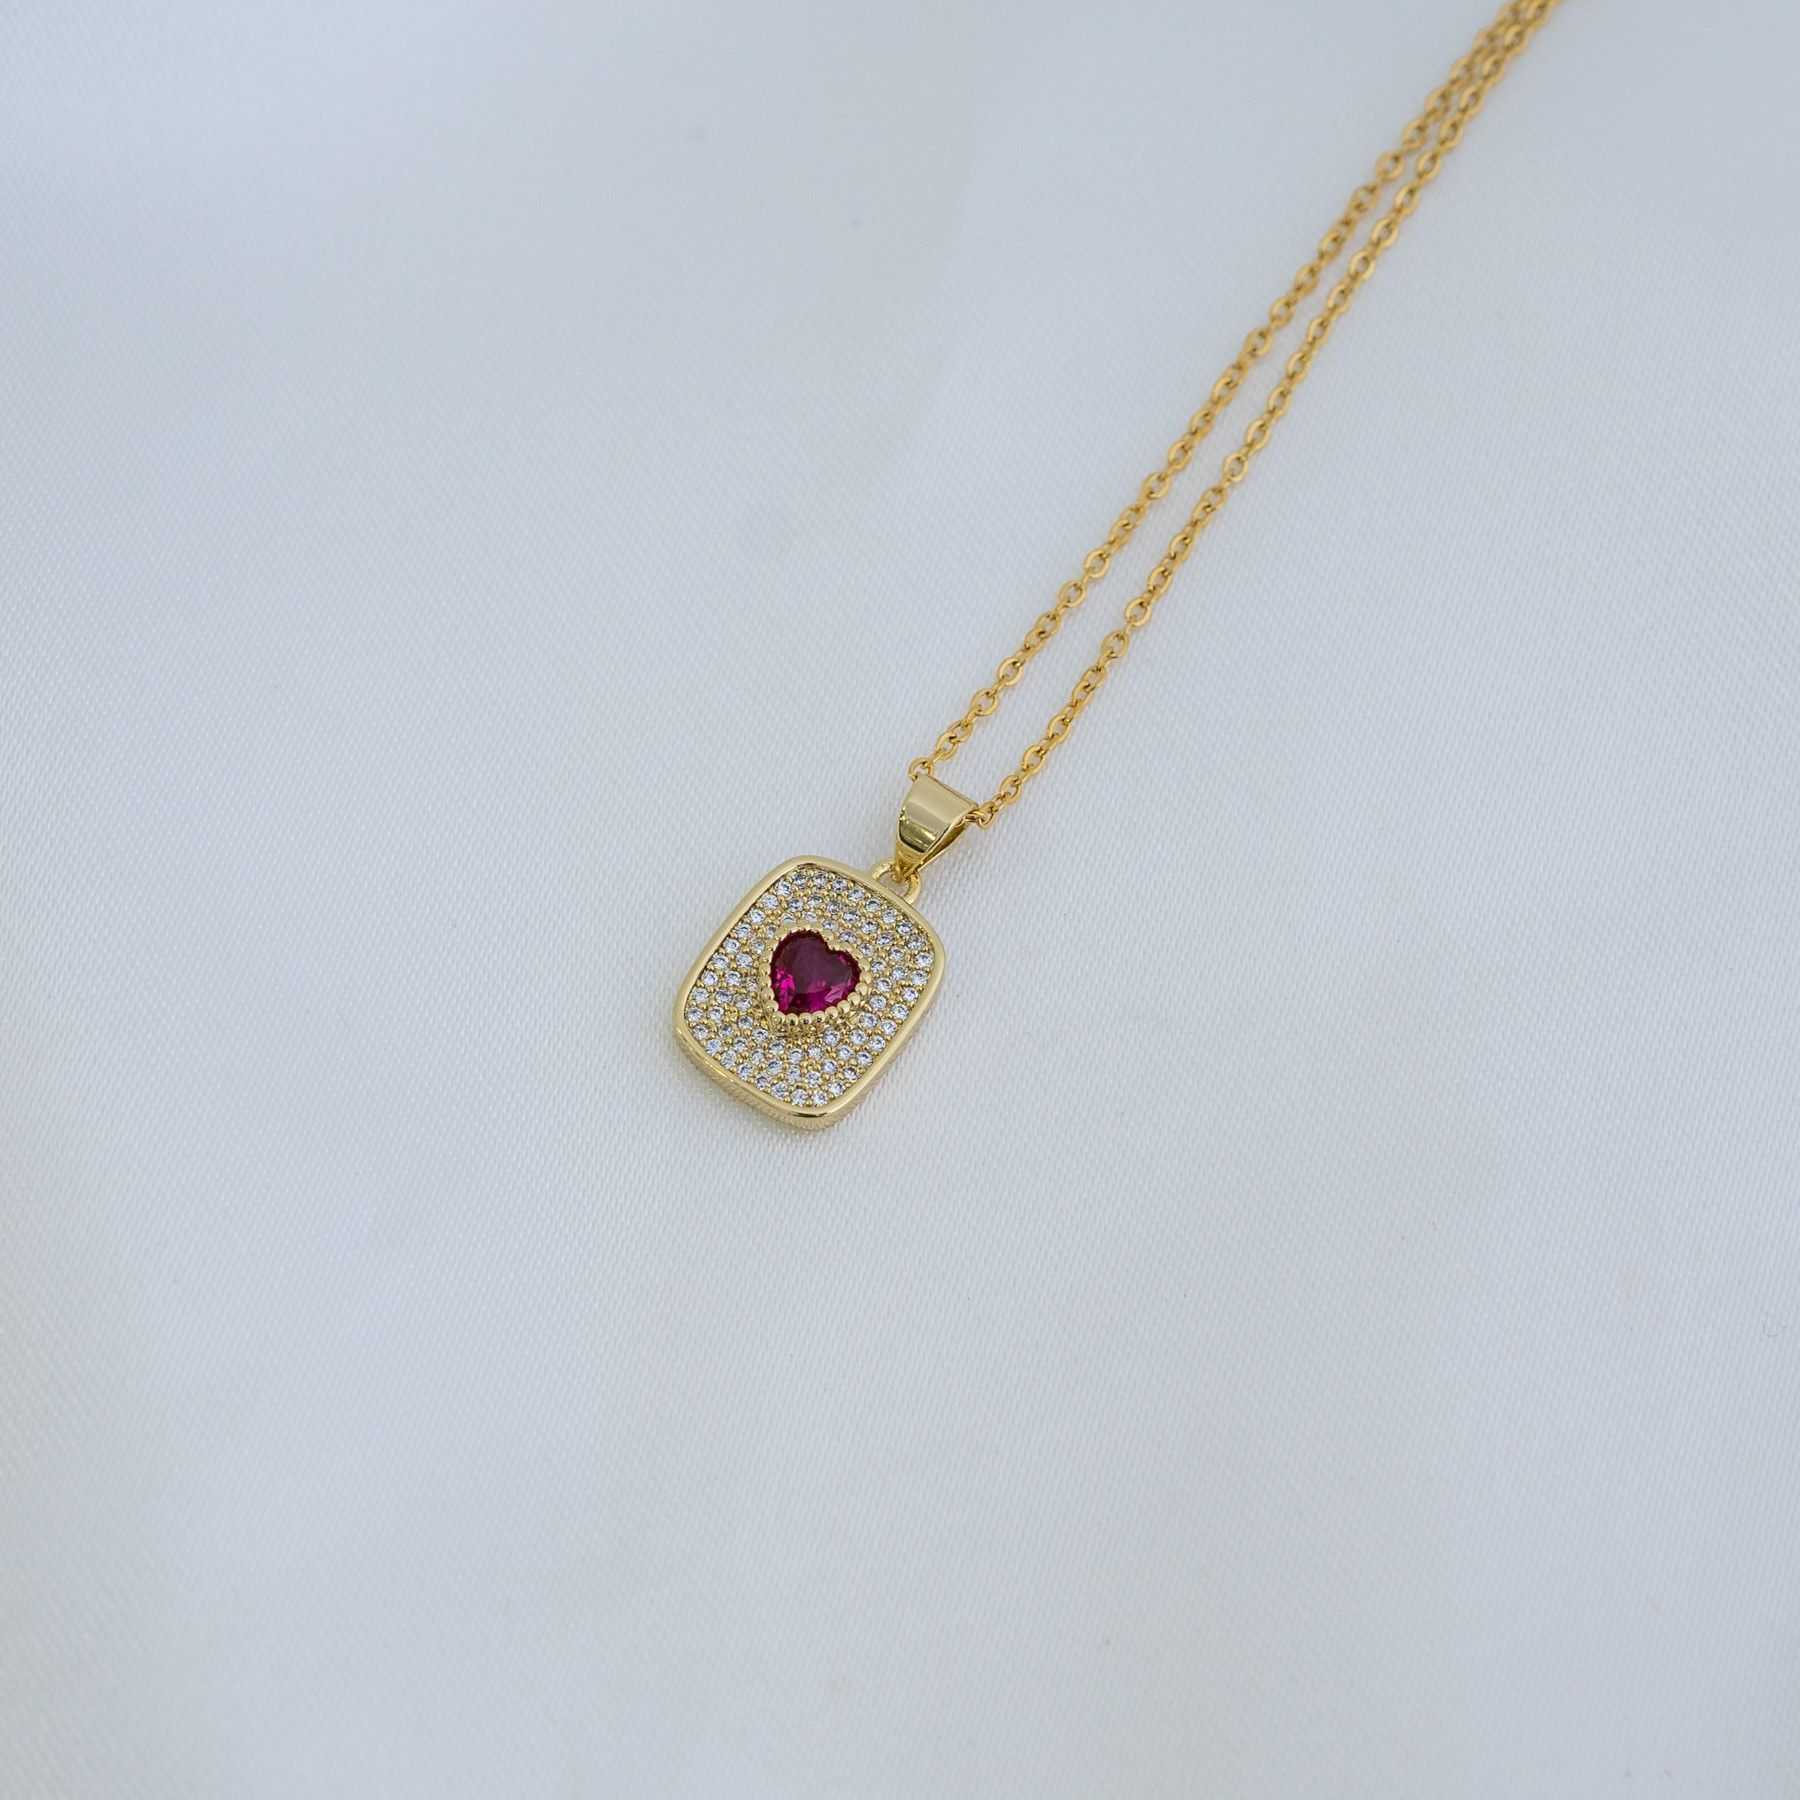 I LOVE YOU NECKLACE - GOLD & RED